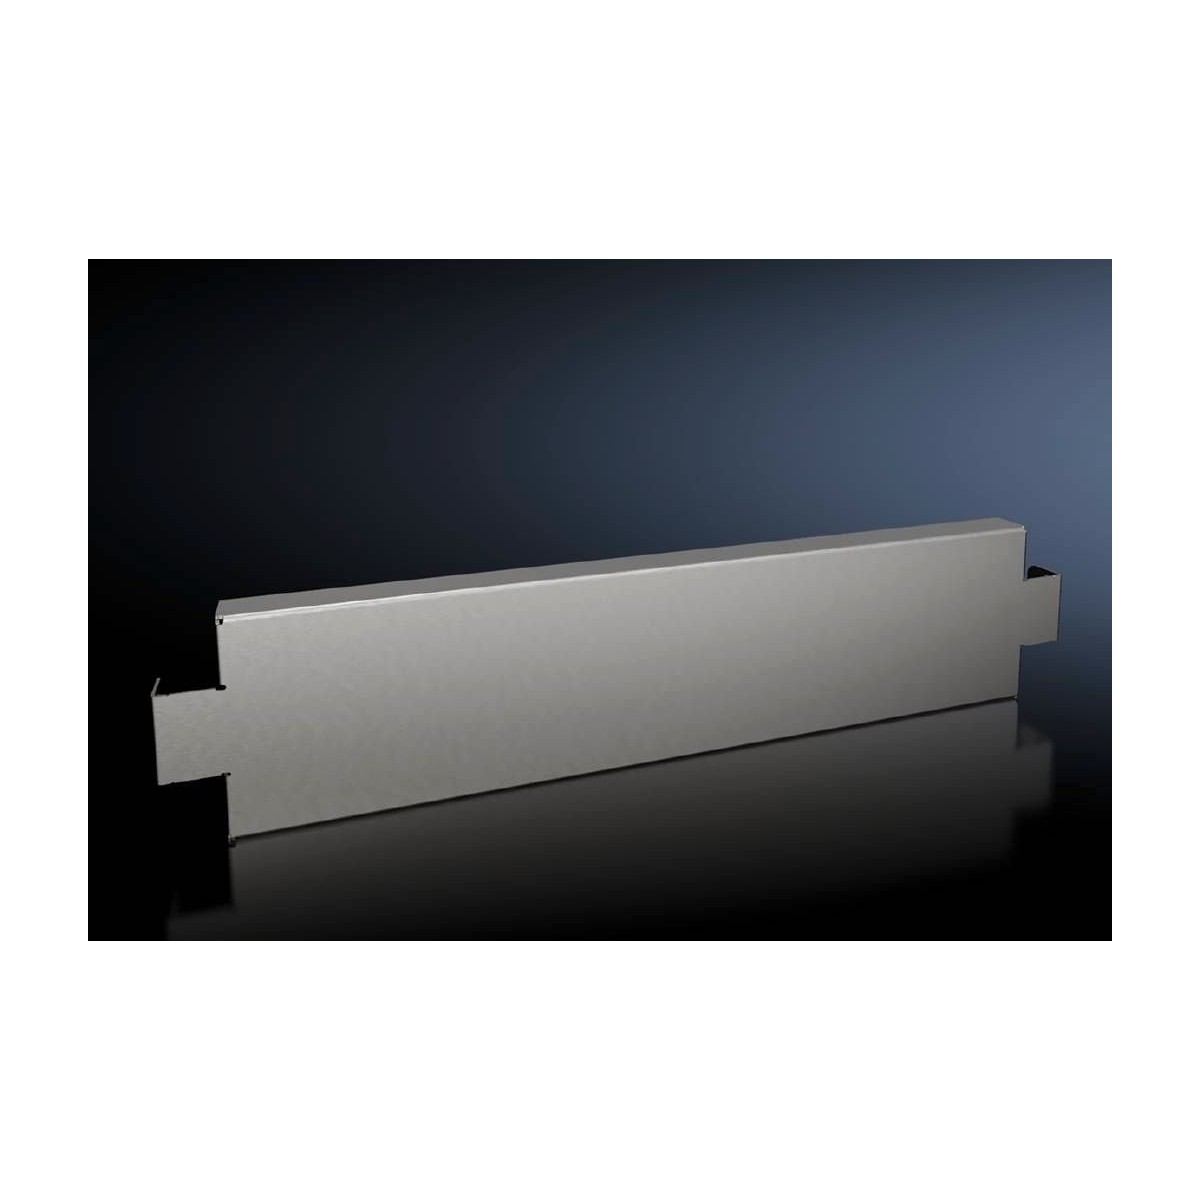 Rittal VX 8620.072 - Trim panel - Grey - Stainless steel - 100 mm - 2 pc(s) - 2.8 kg